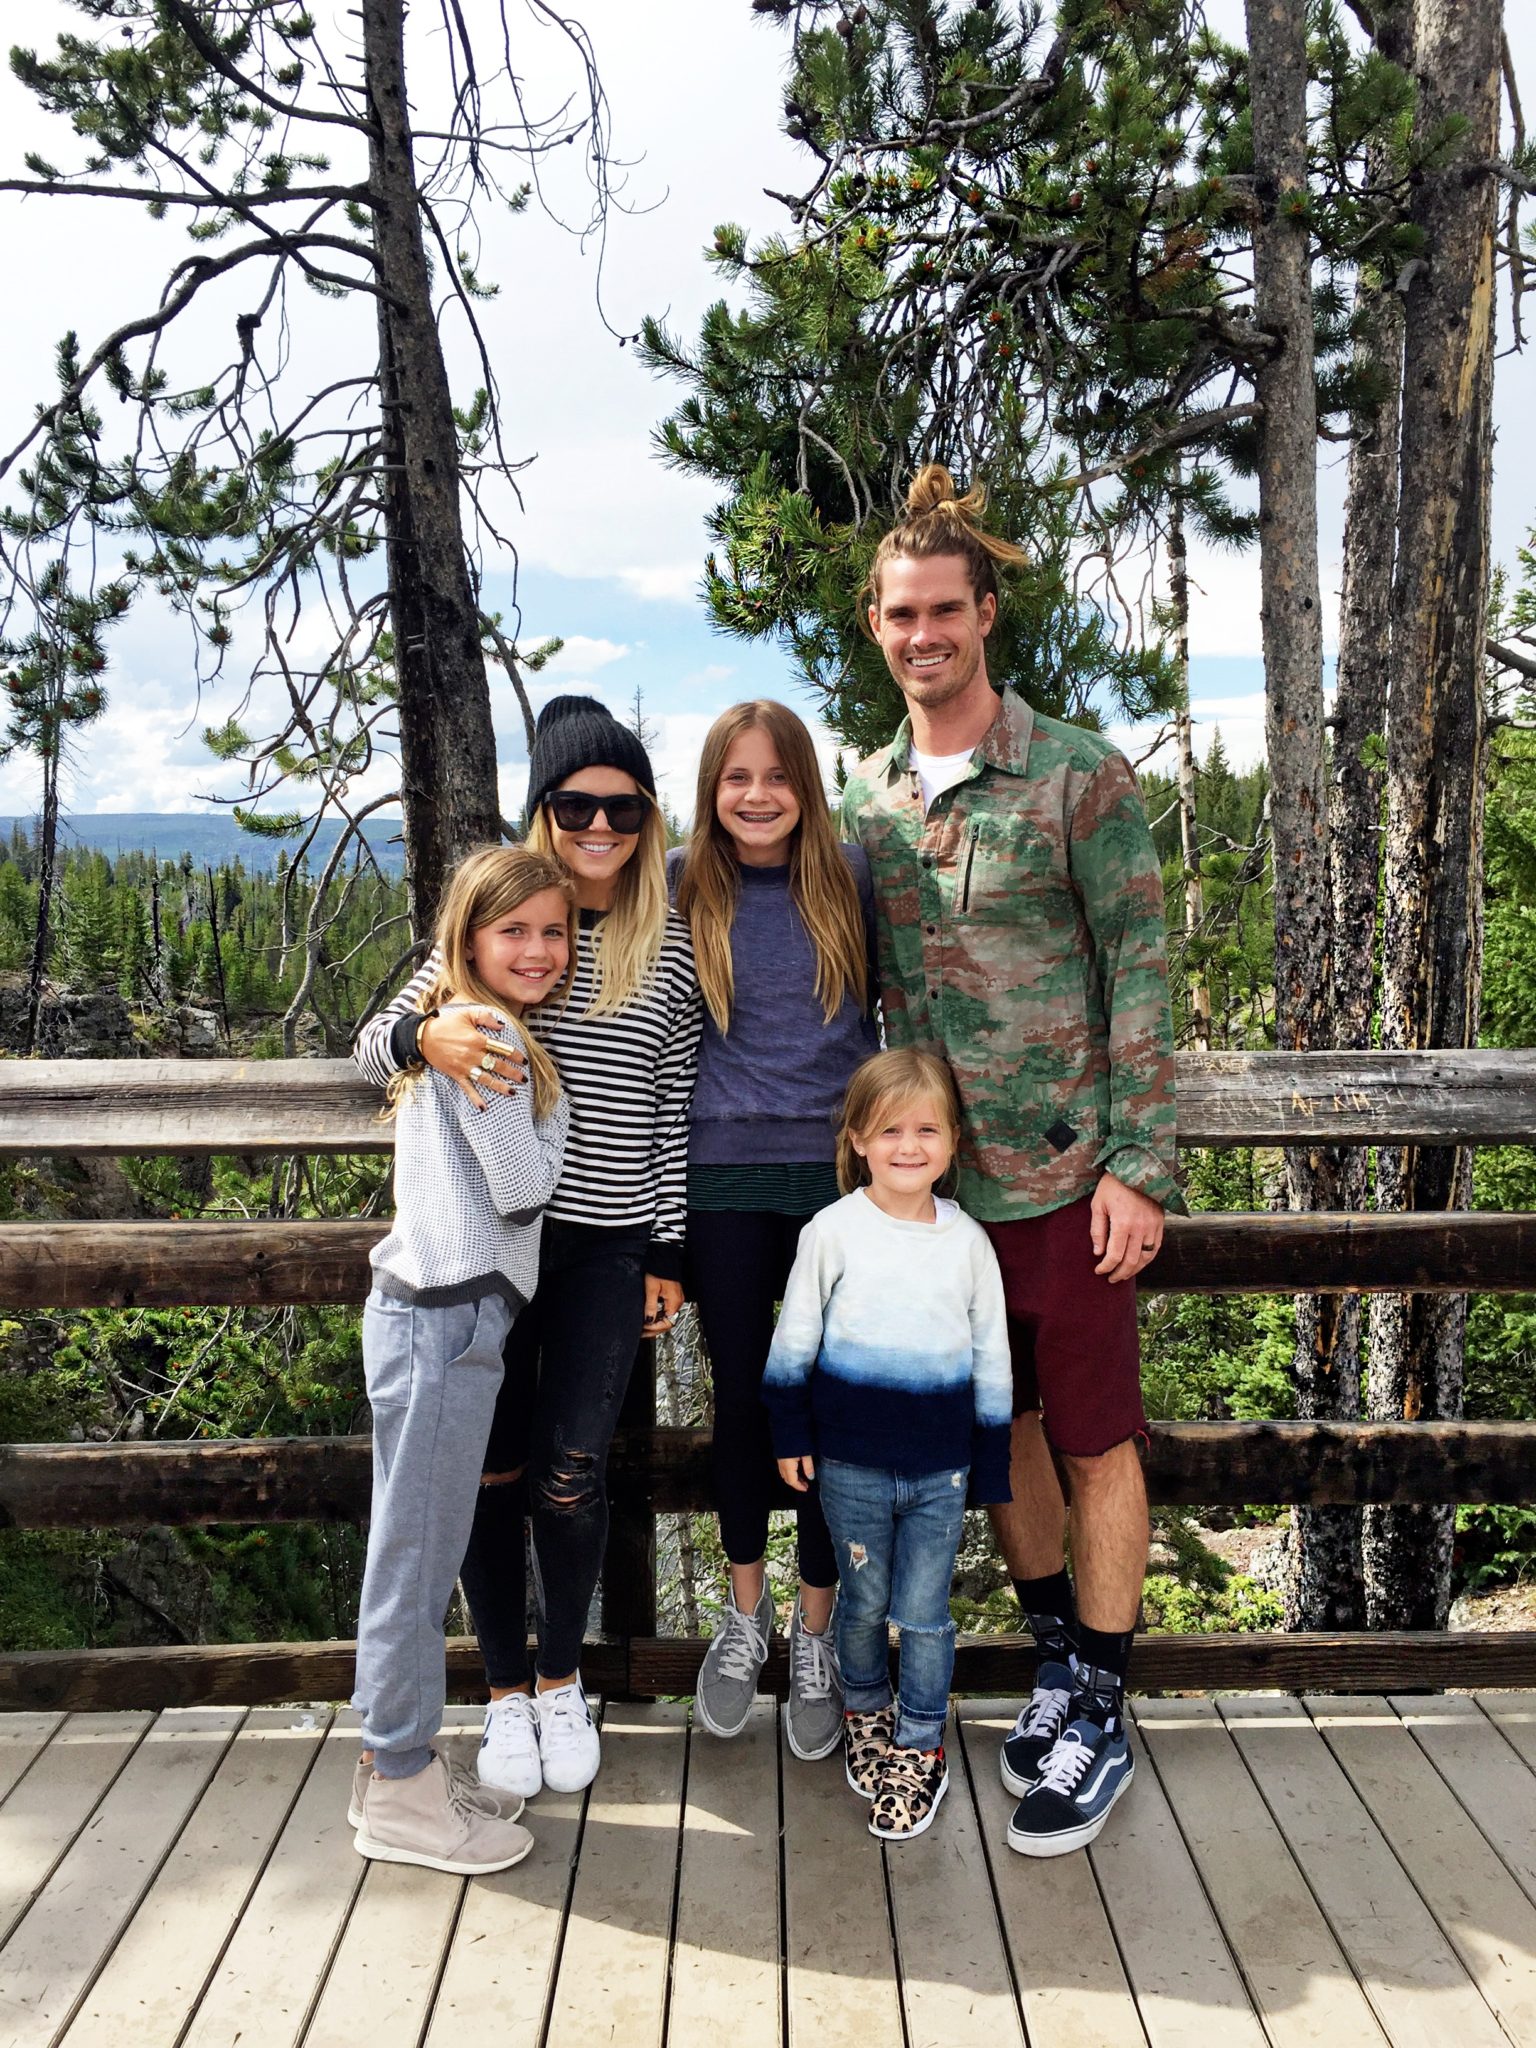 Yellowstone Family Road Trip: $1500 = 5 Days, 4 Hotels, Food